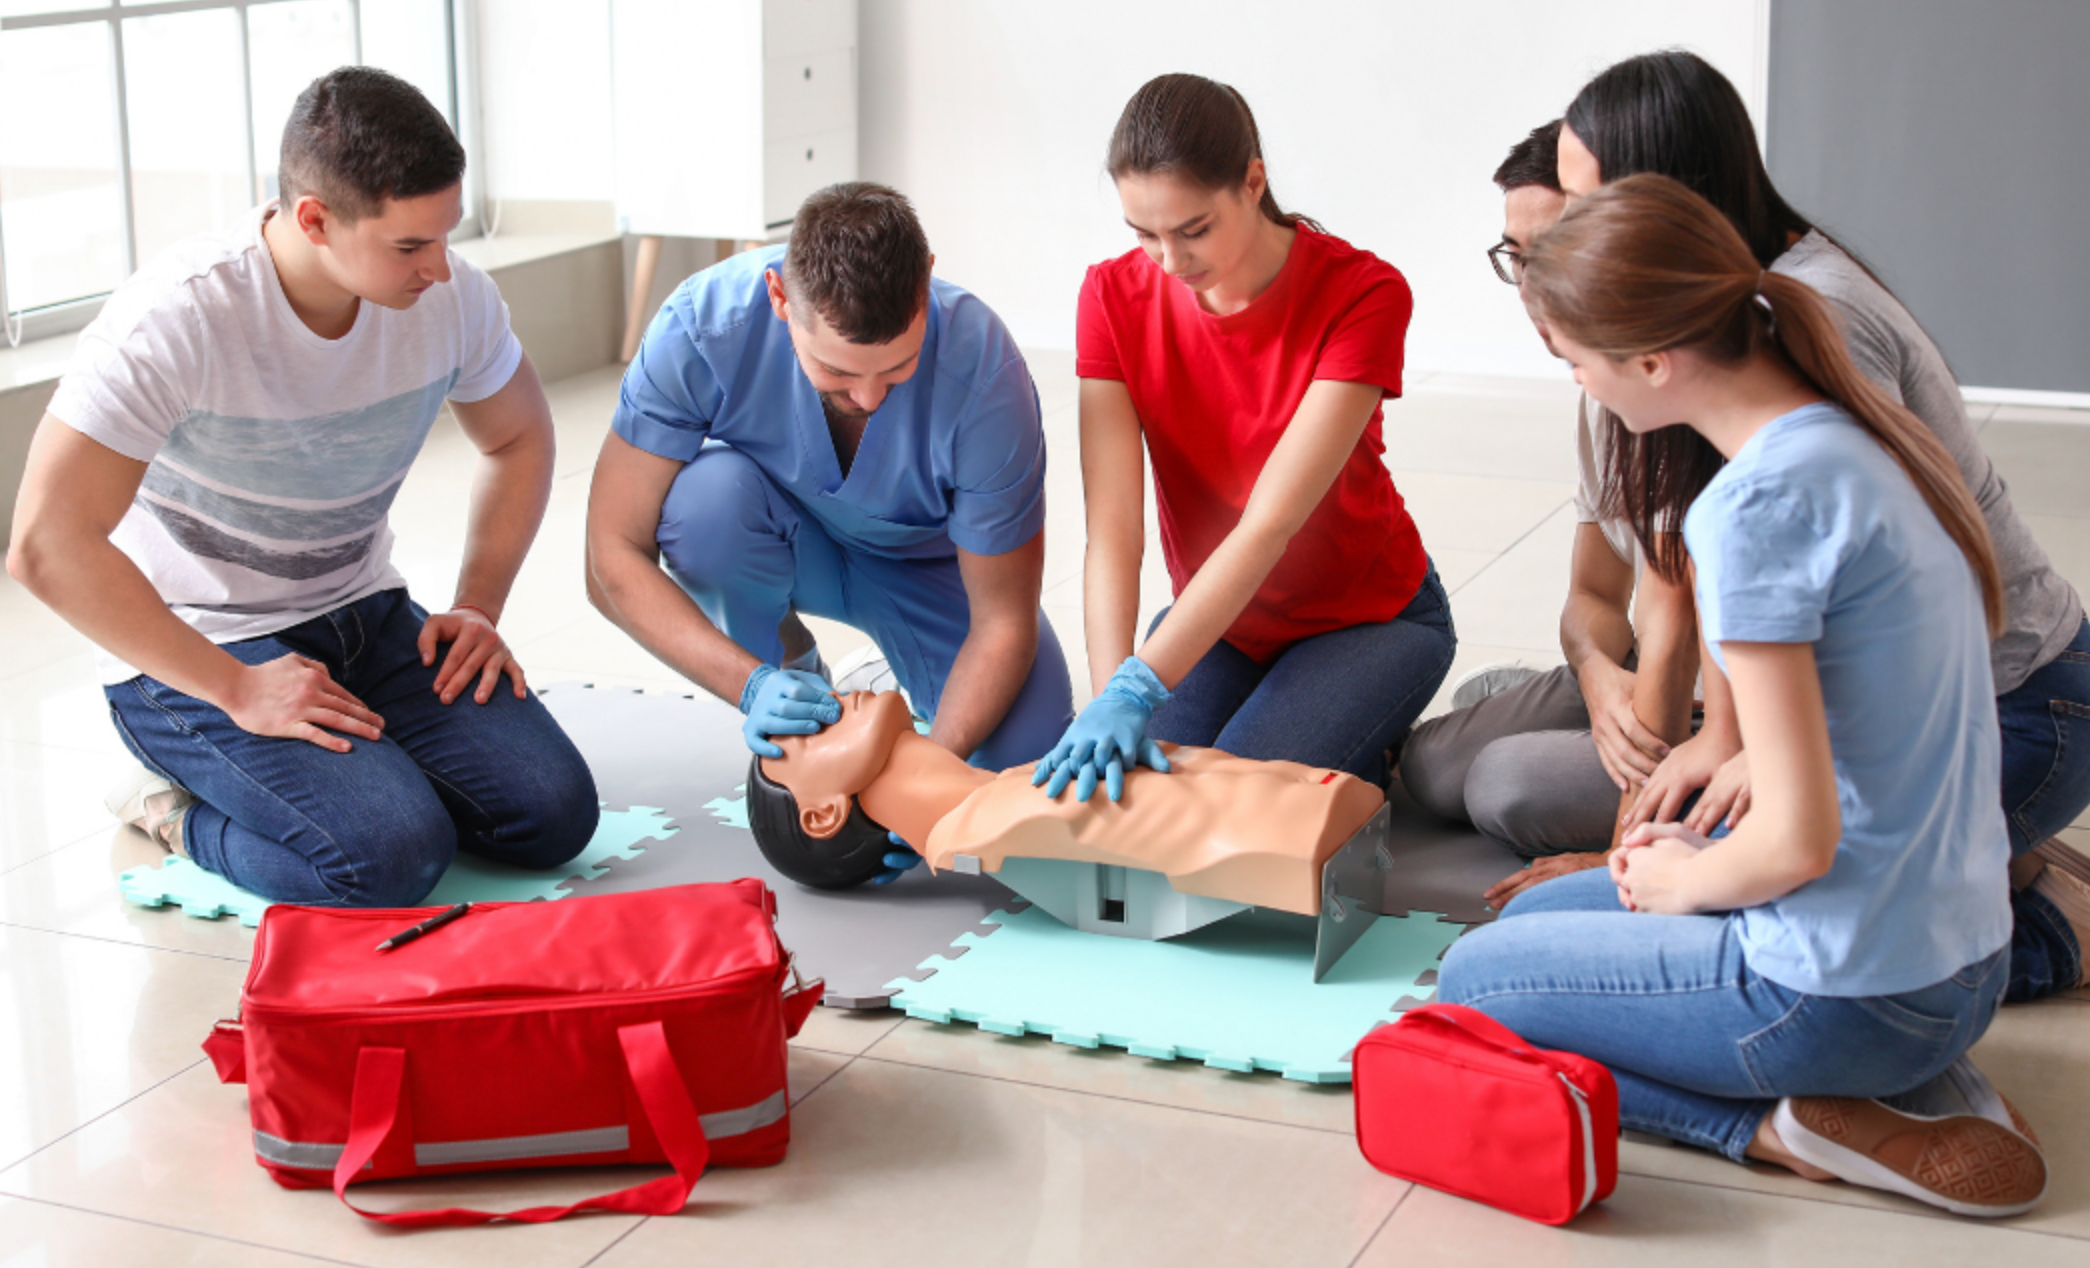 What’s the difference between standard and emergency first aid courses?